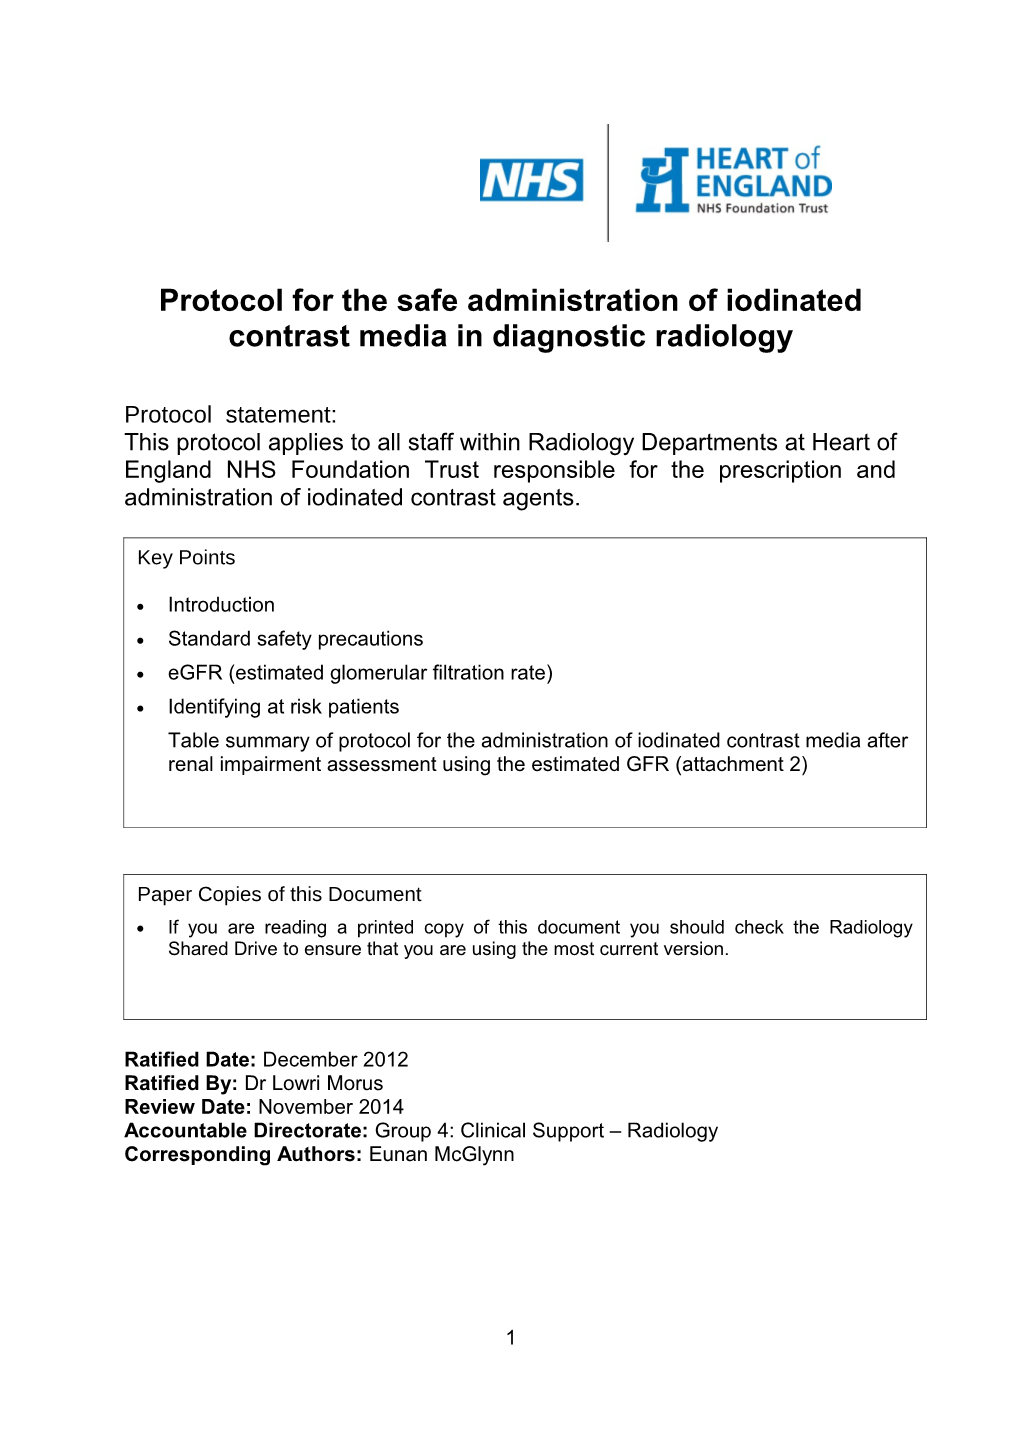 Protocol for the Safe Administration of Iodinated Contrast Media in Diagnostic Radiology